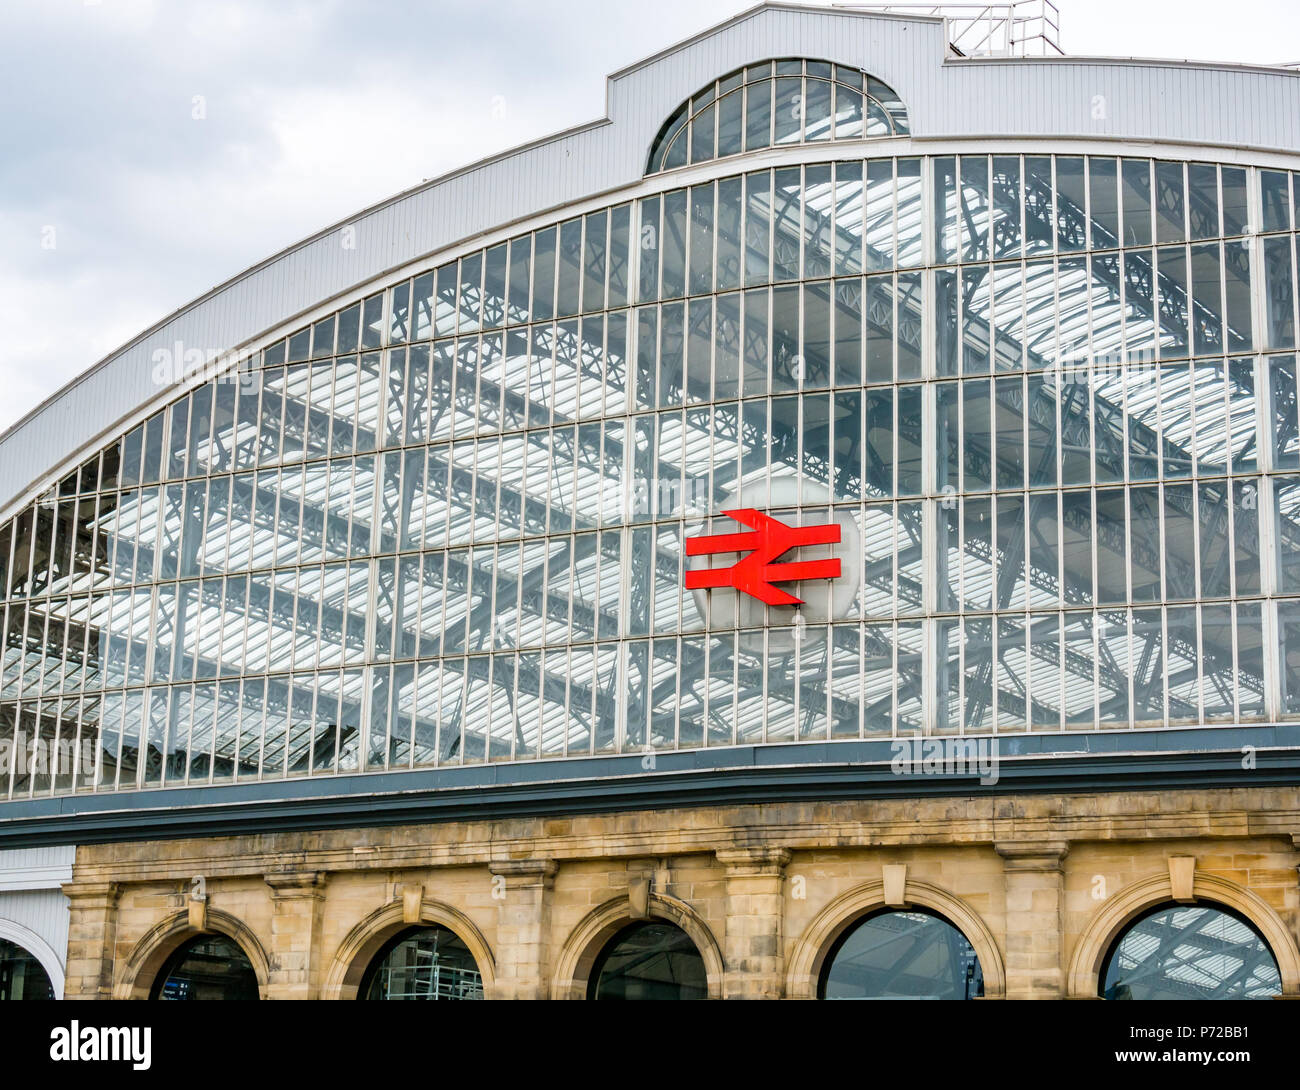 Curved glass roof of Liverpool Lime Street mainline railway station with Network Rail symbol, Liverpool, England, UK Stock Photo